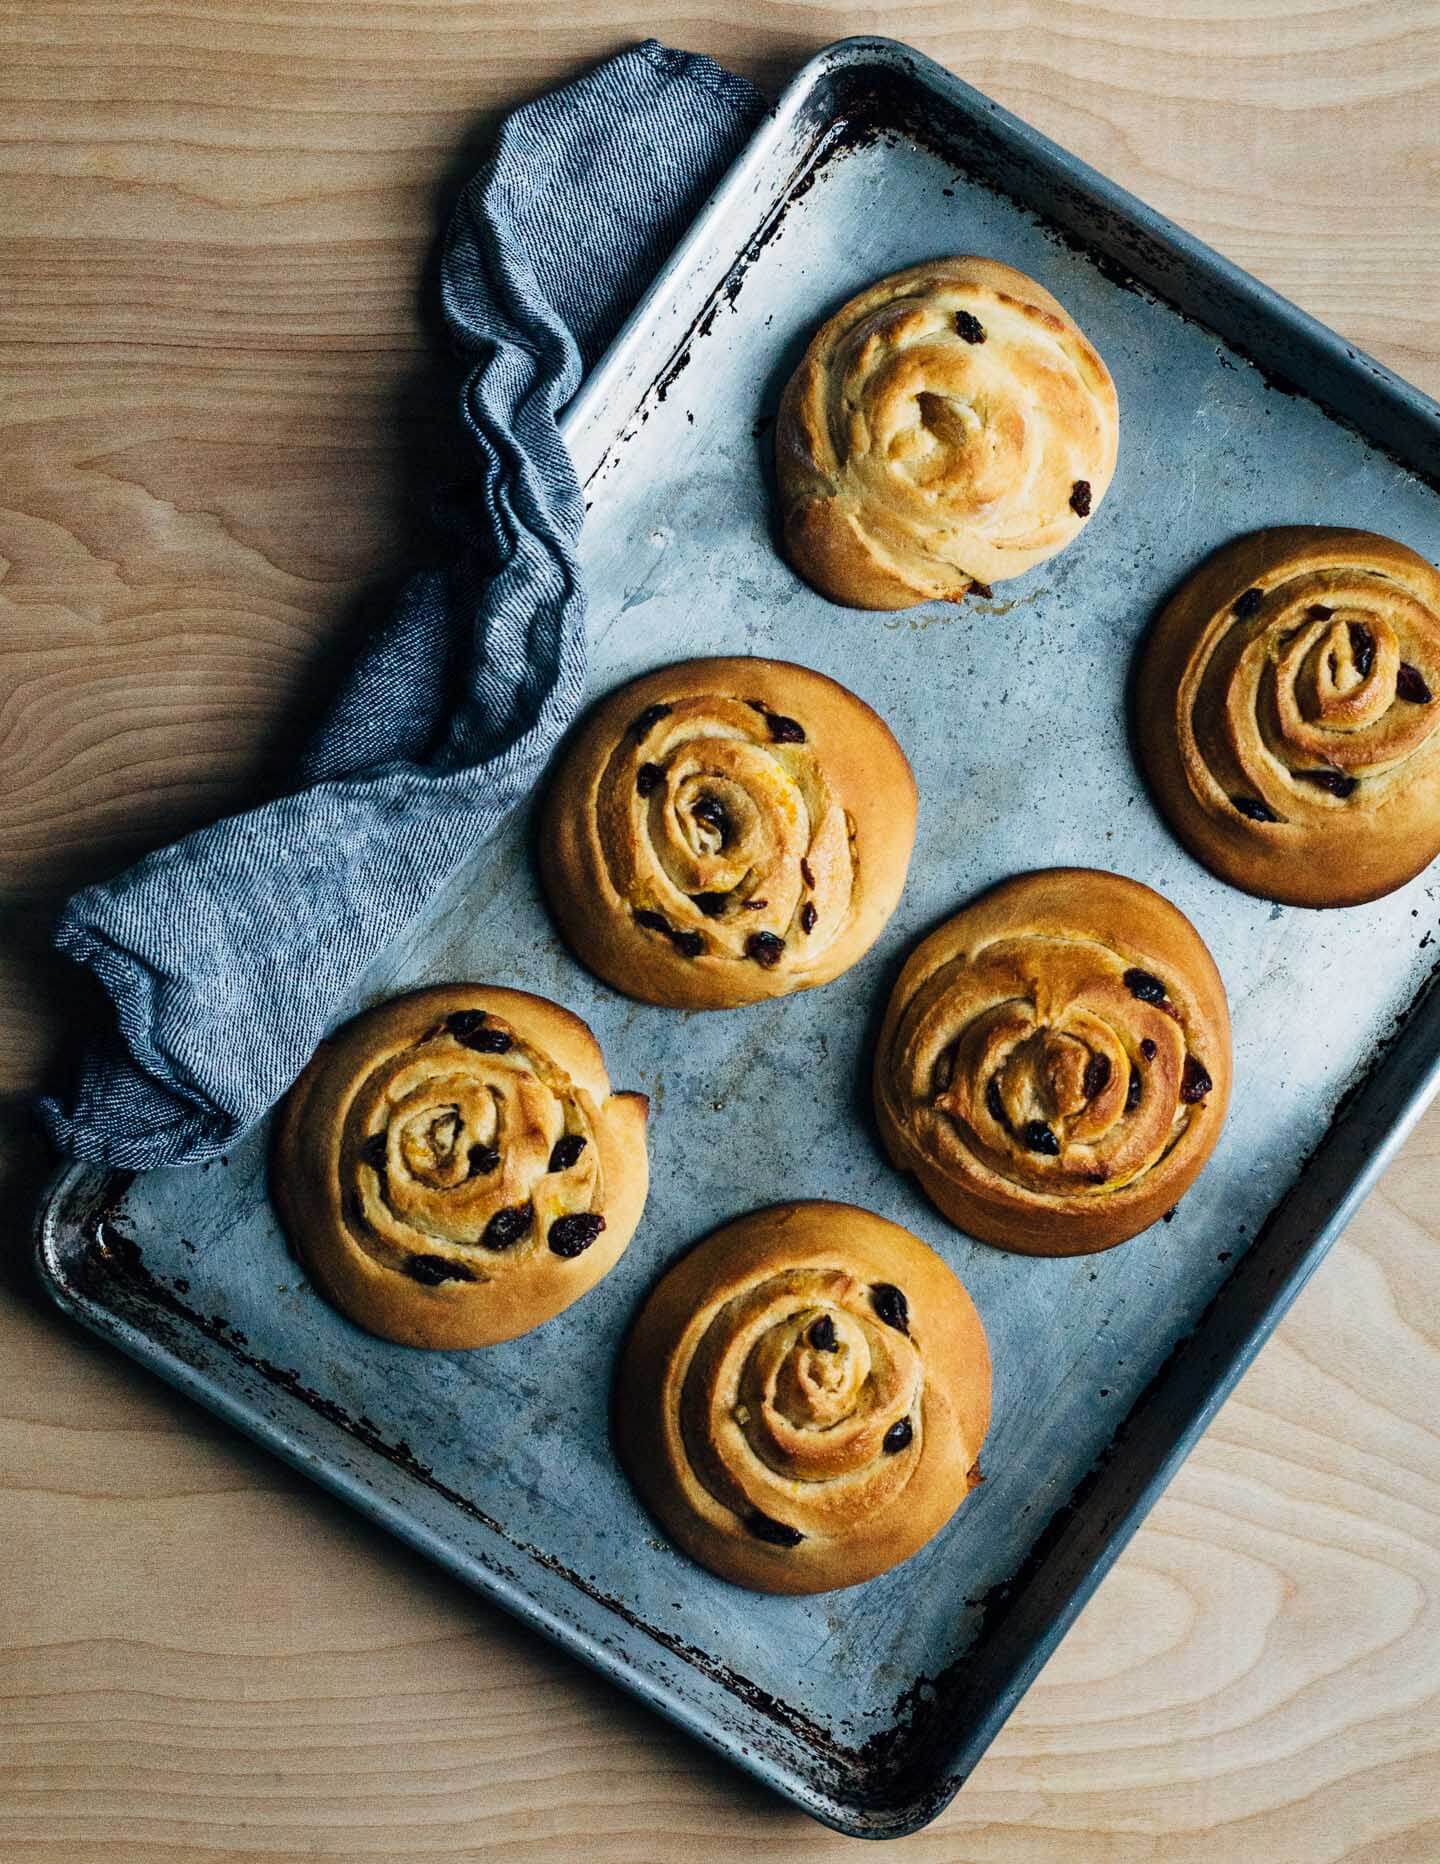 Stretchy, chewy overnight stollen swirl buns suffused with cardamom, cinnamon, and allspice, from Aimée Wimbush-Bourque's cookbook, The Simple Bites Kitchen.